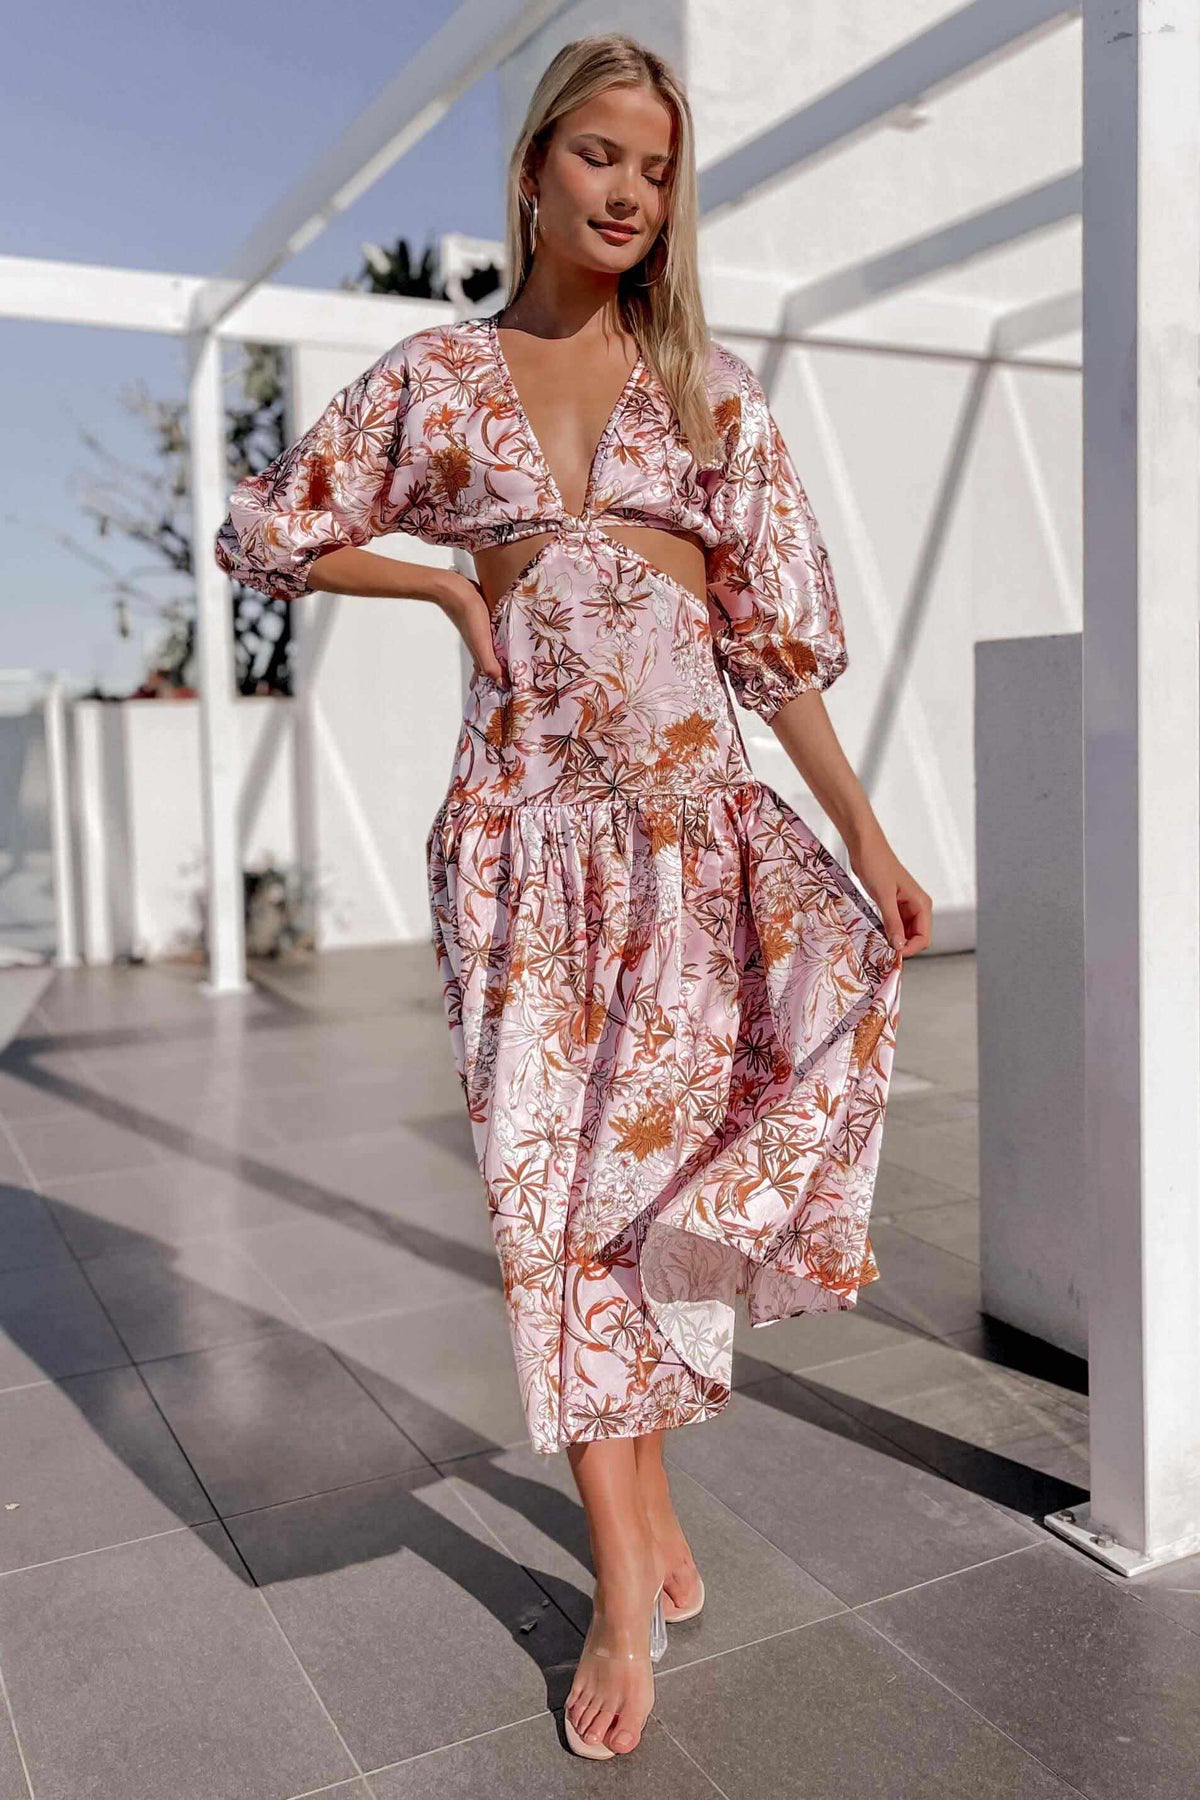 Carmito Dress, CUT OUT, DRESS, DRESSES, FLORAL, MIDI DRESS, PINK, PRINT, Sale, SILKY, SPECIAL OCCASION, Carmito Dress only $79.00 @ MISHKAH ONLINE FASHION BOUTIQUE, Shop The Latest Women&#39;s Dresses - Our New Carmito Dress is only $79.00, @ MISHKAH ONLINE FASHION BOUTIQUE-MISHKAH